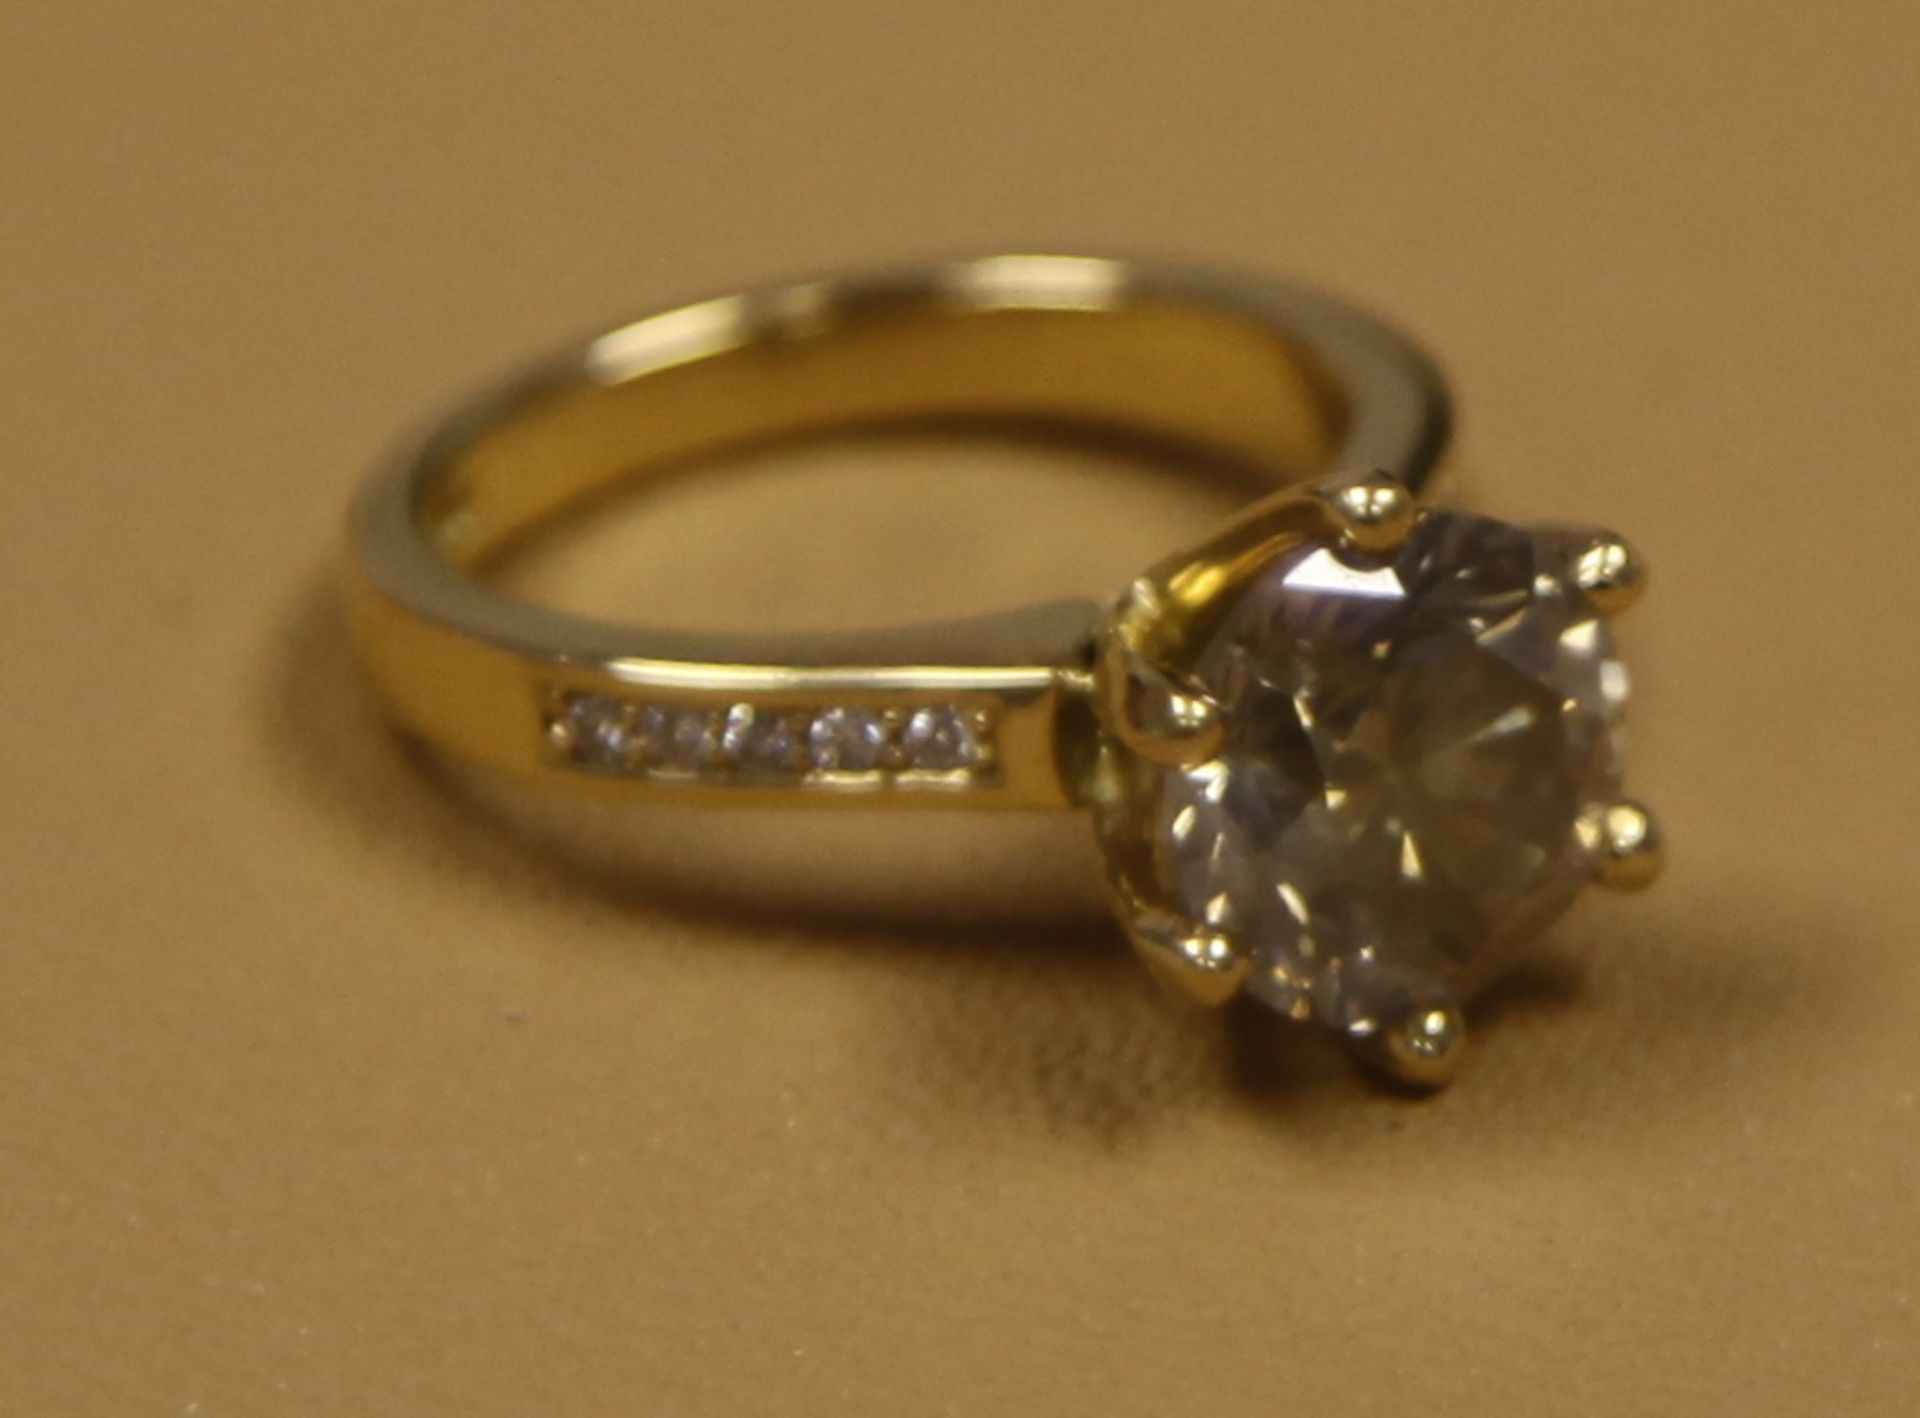 A 3.5 Carat Diamond Solitaire Ring, With a 3.0 carat single diamond, mounted in 18 carat gold,